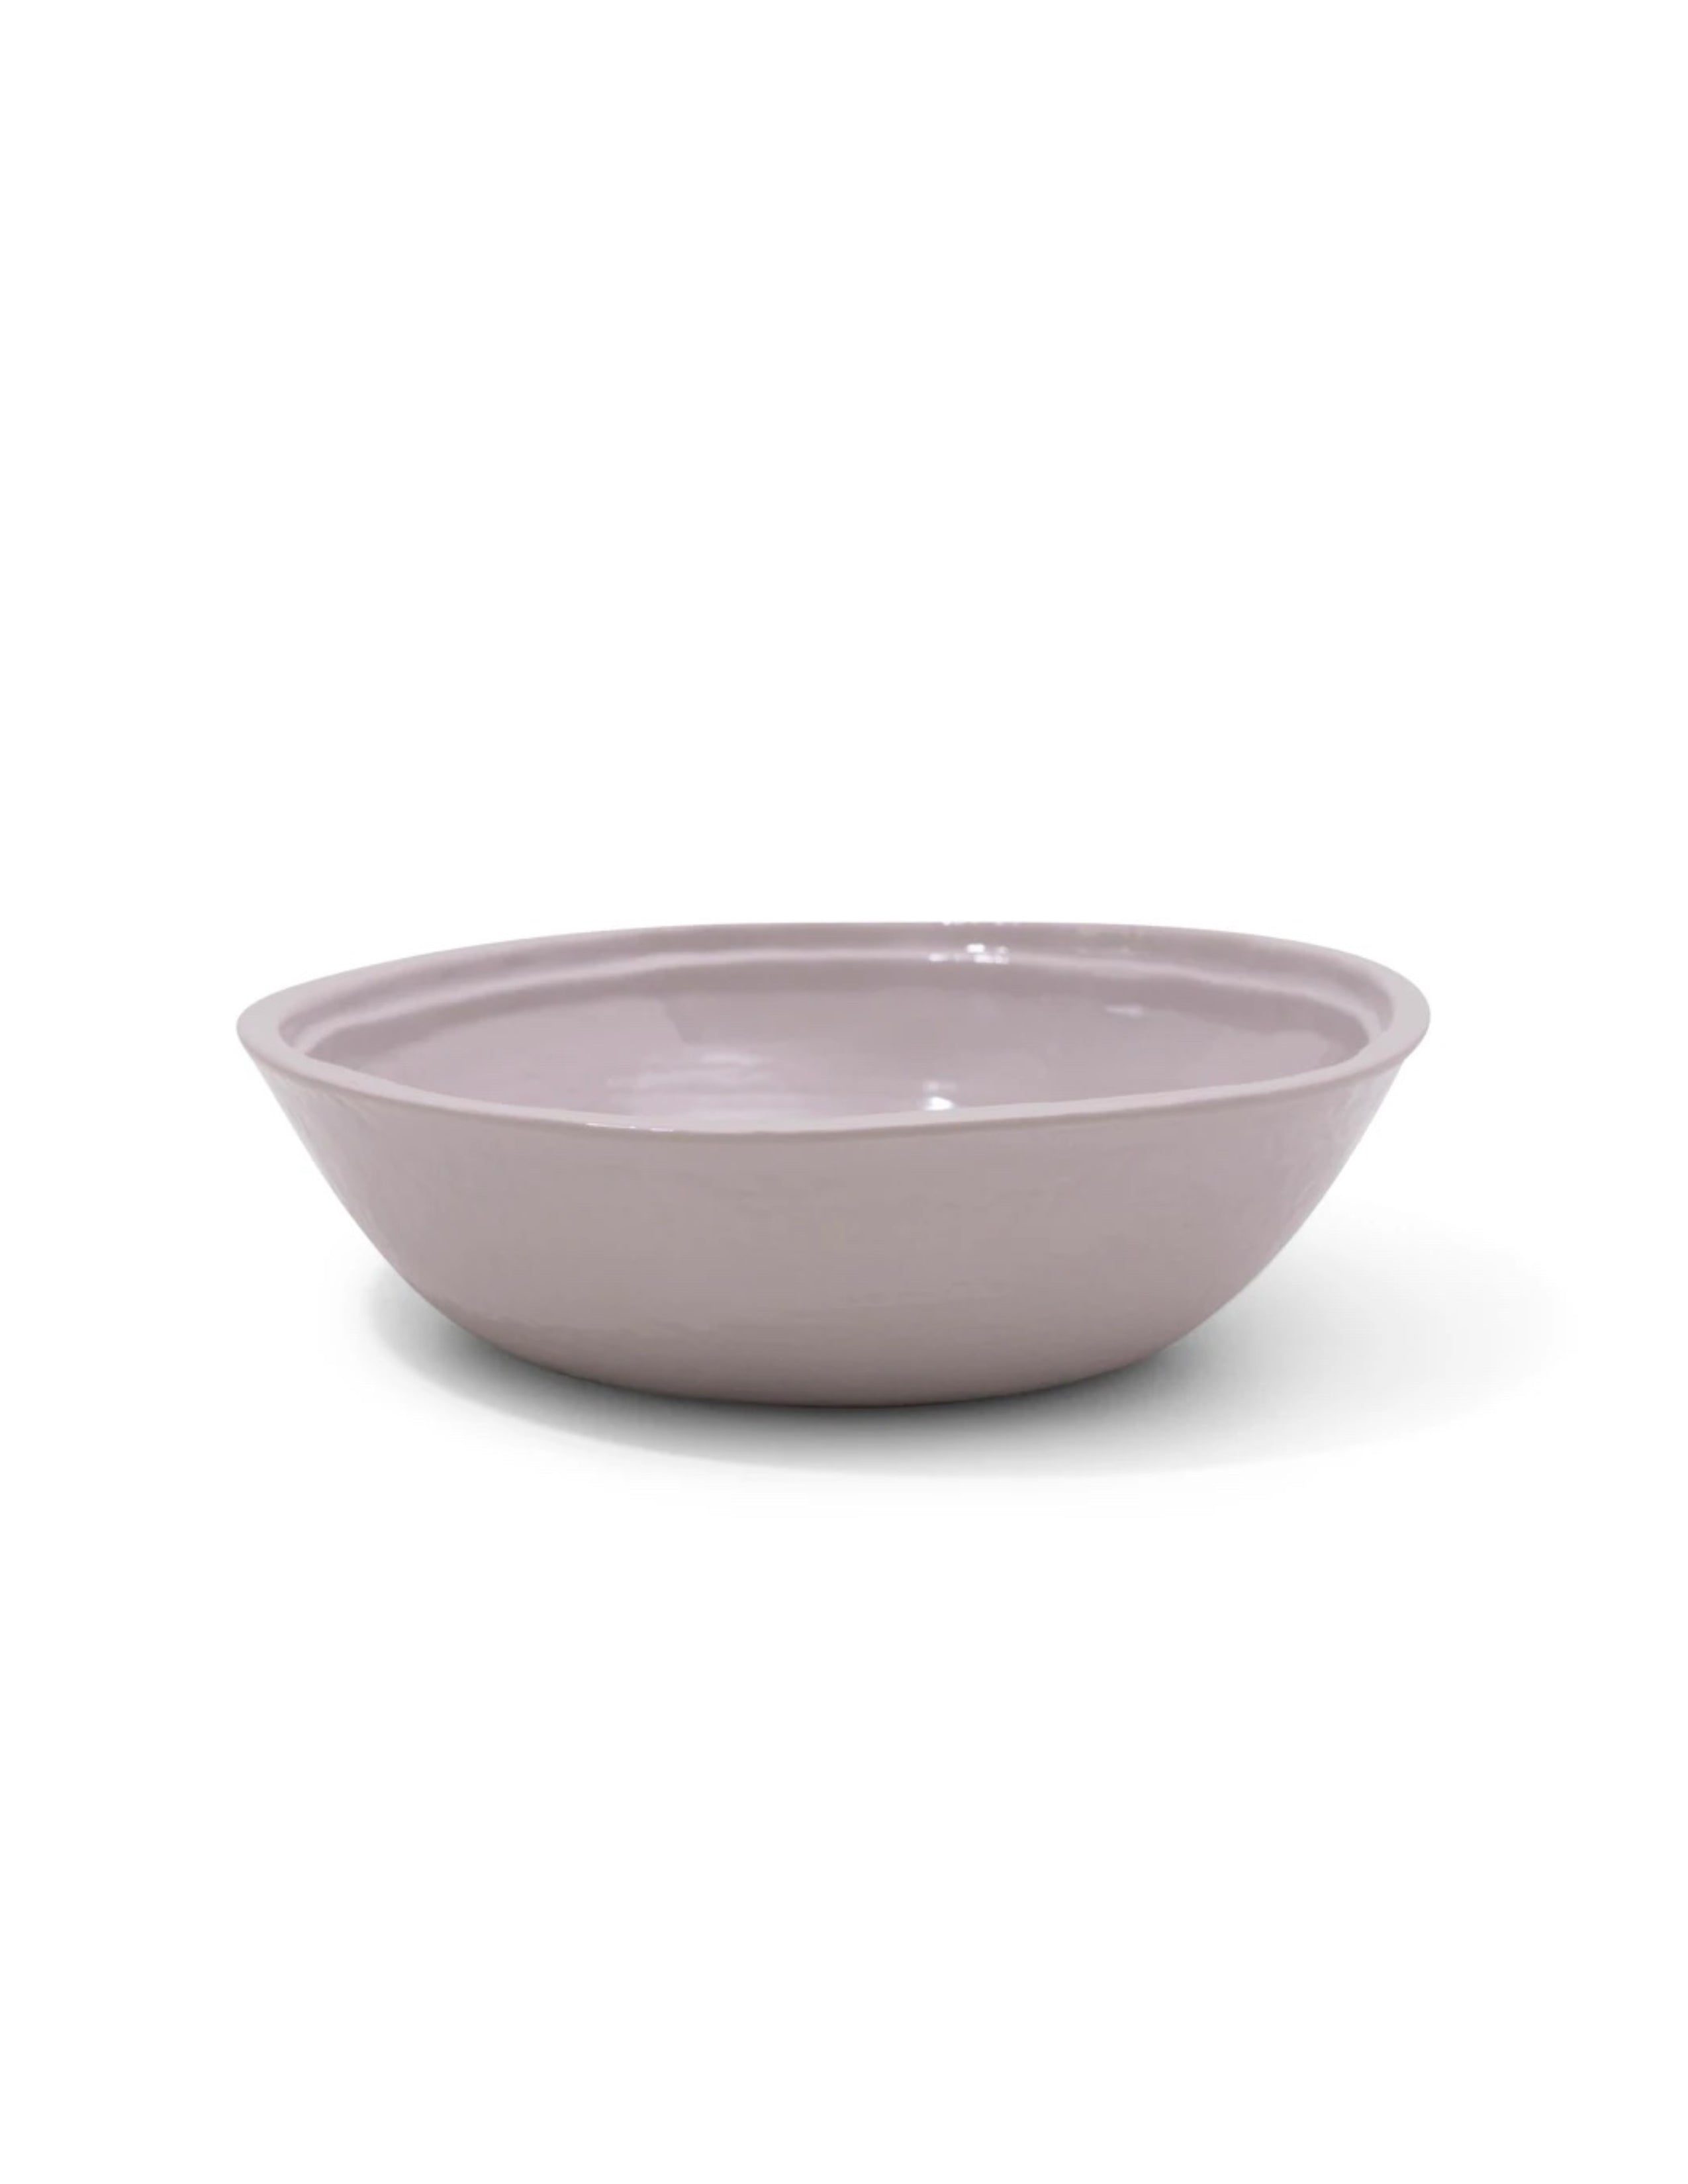 Double Lined Soup/Cereal Bowl - Stone